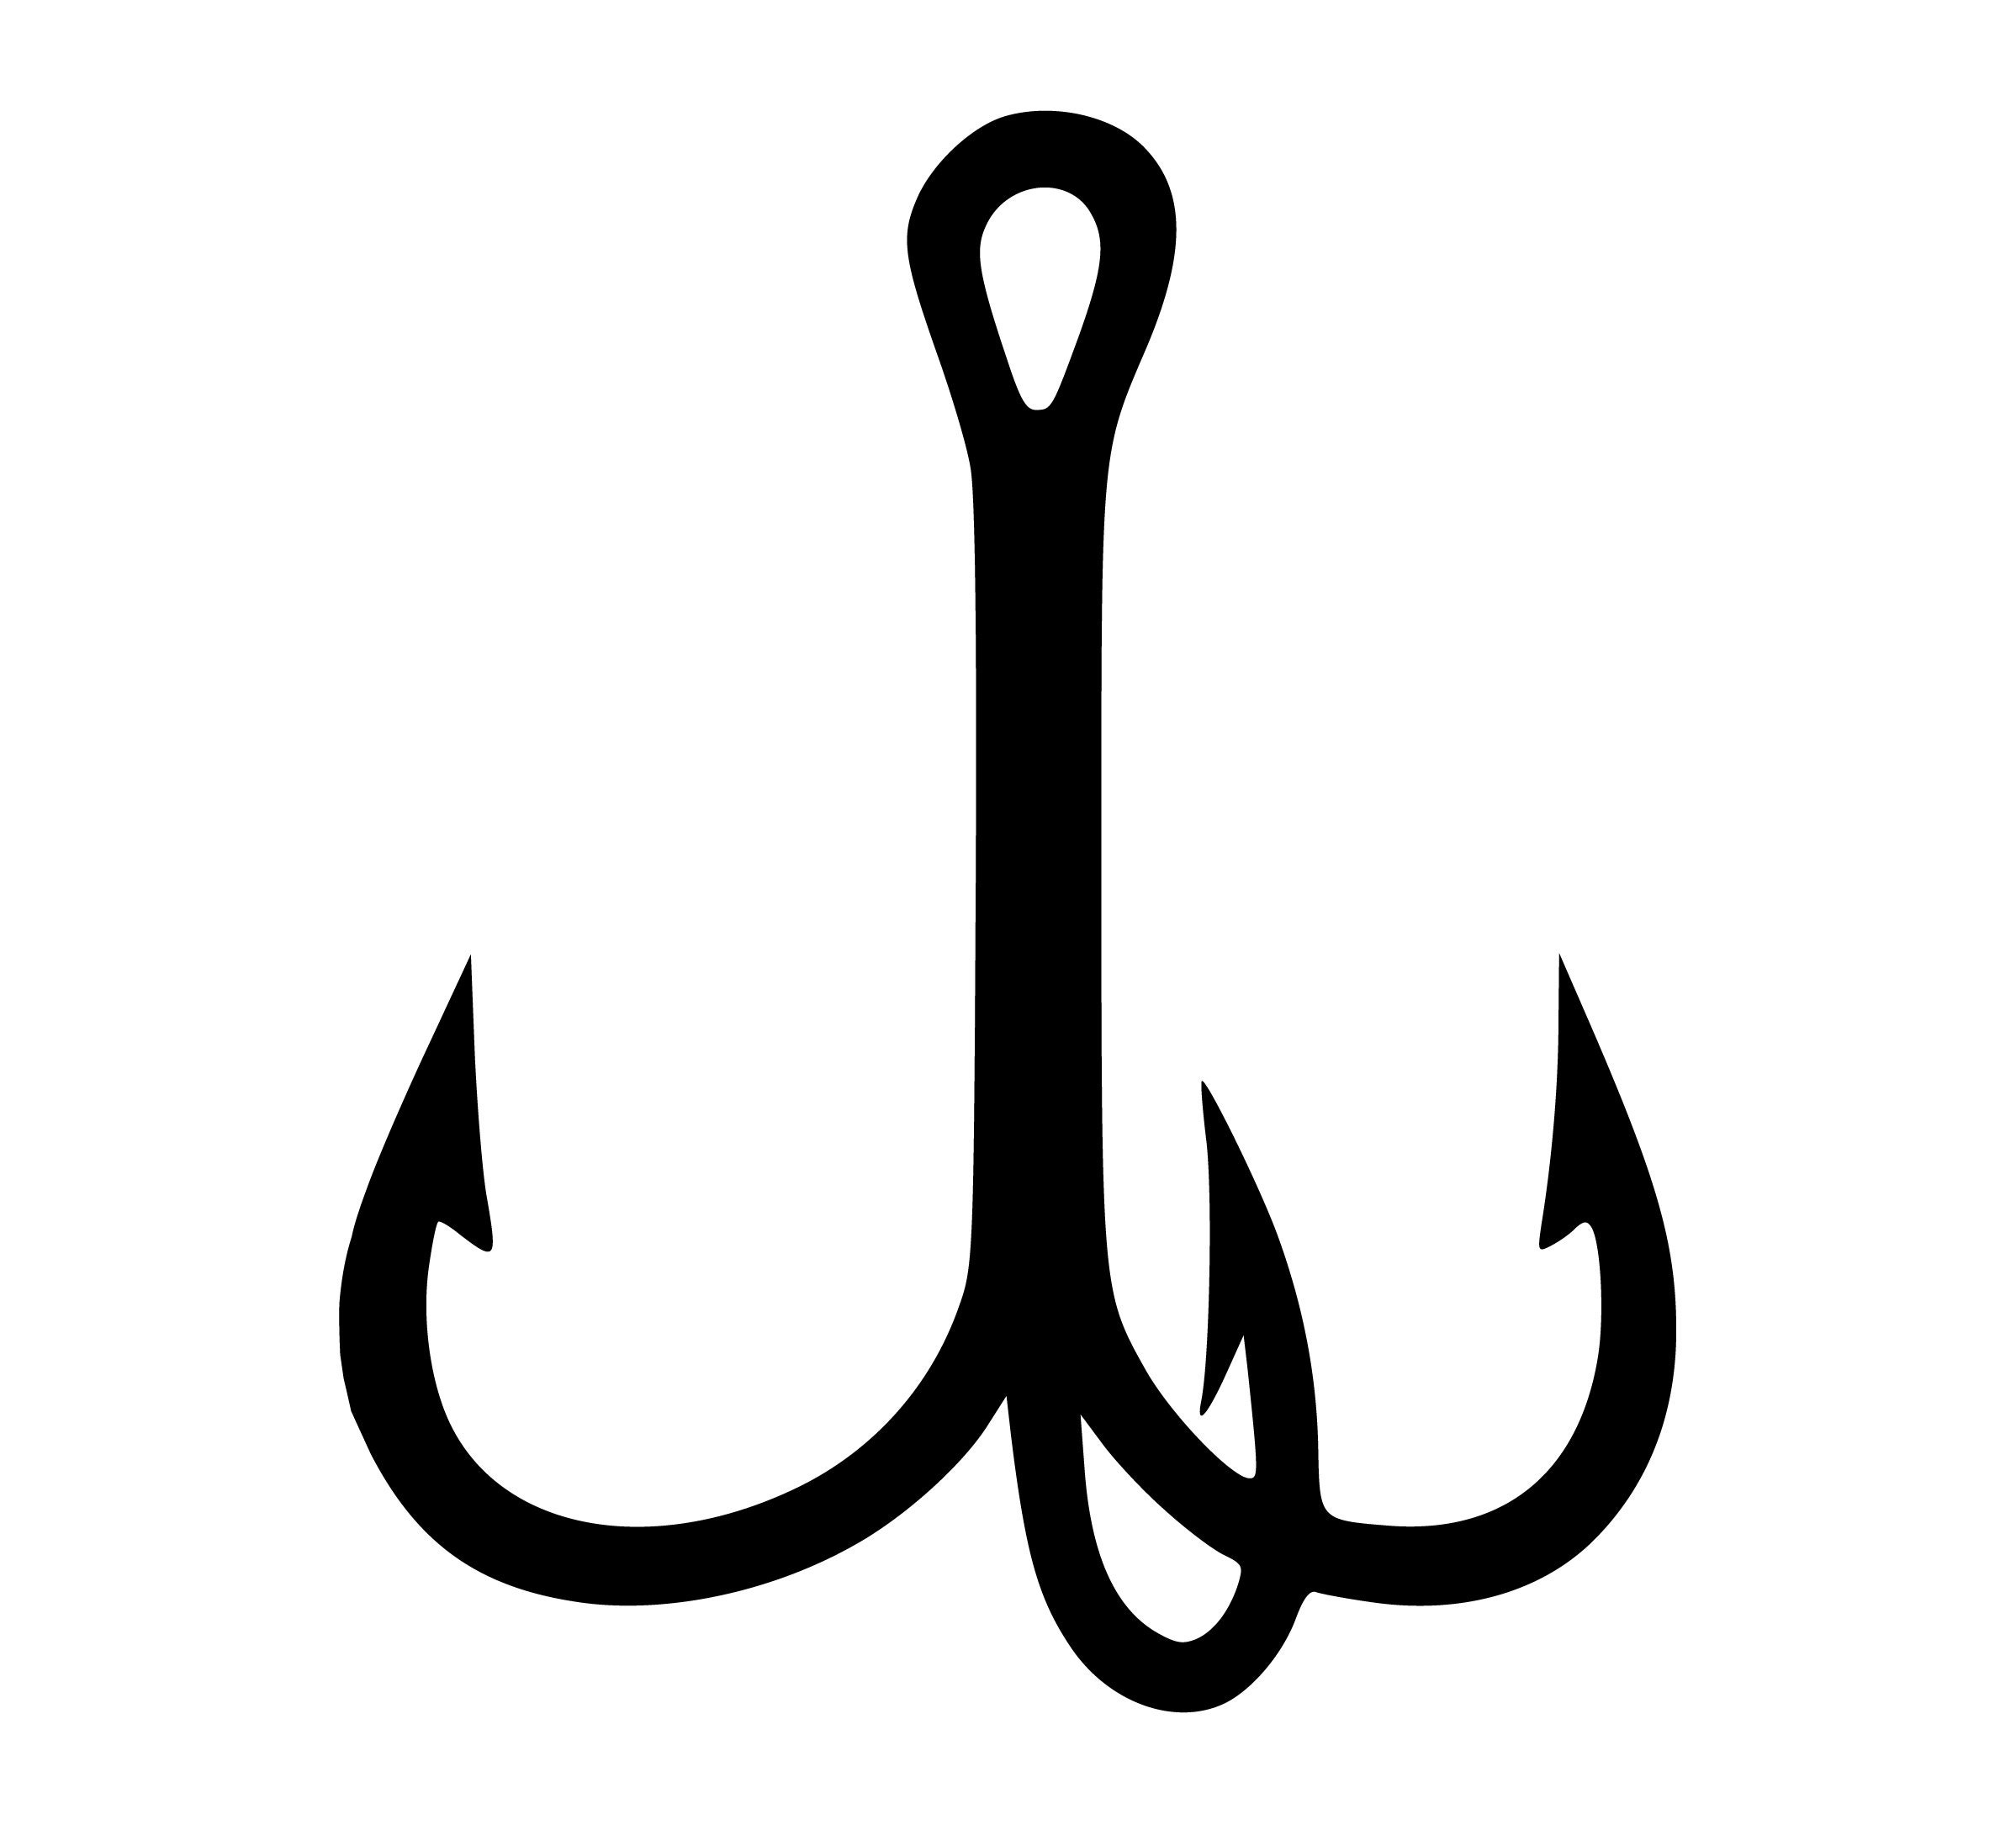 Buy Treble Hook Svg Online In India -  India